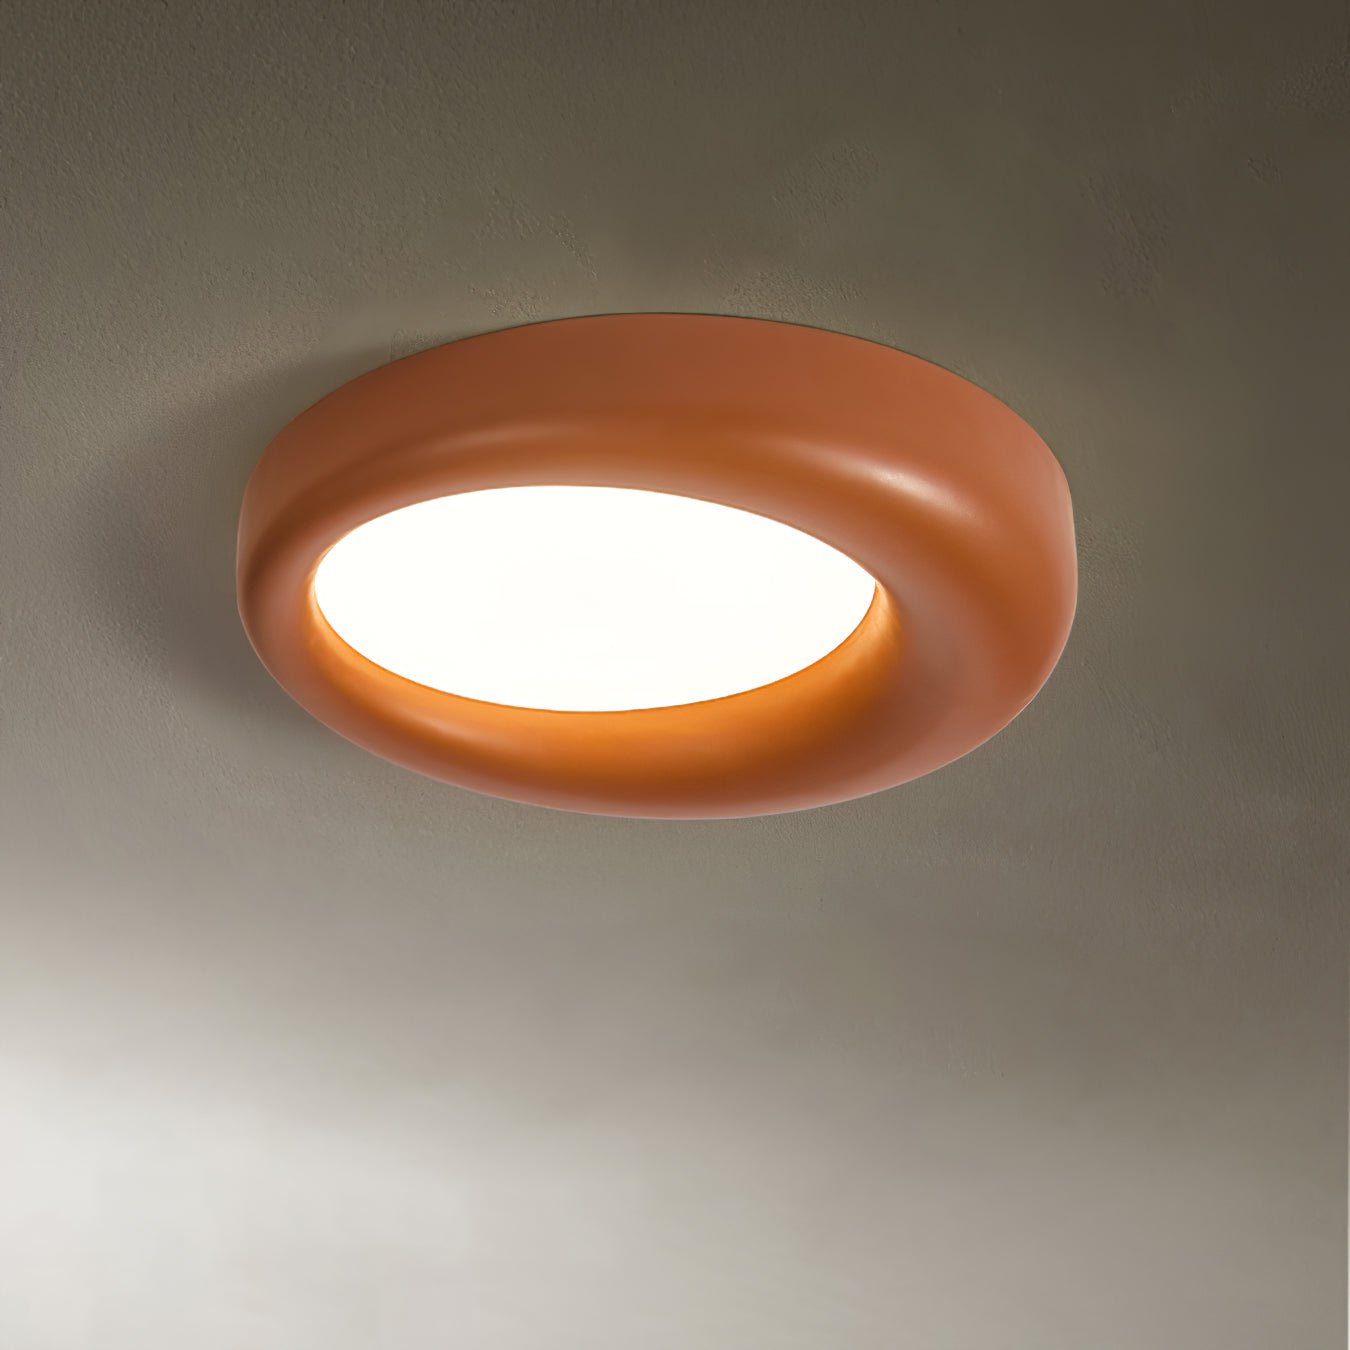 Orange Zero Round Ceiling Lamp with dimensions of ∅ 22.8″ x H 3.5″ (Dia 58cm x H 13cm) and emits a cool white light.